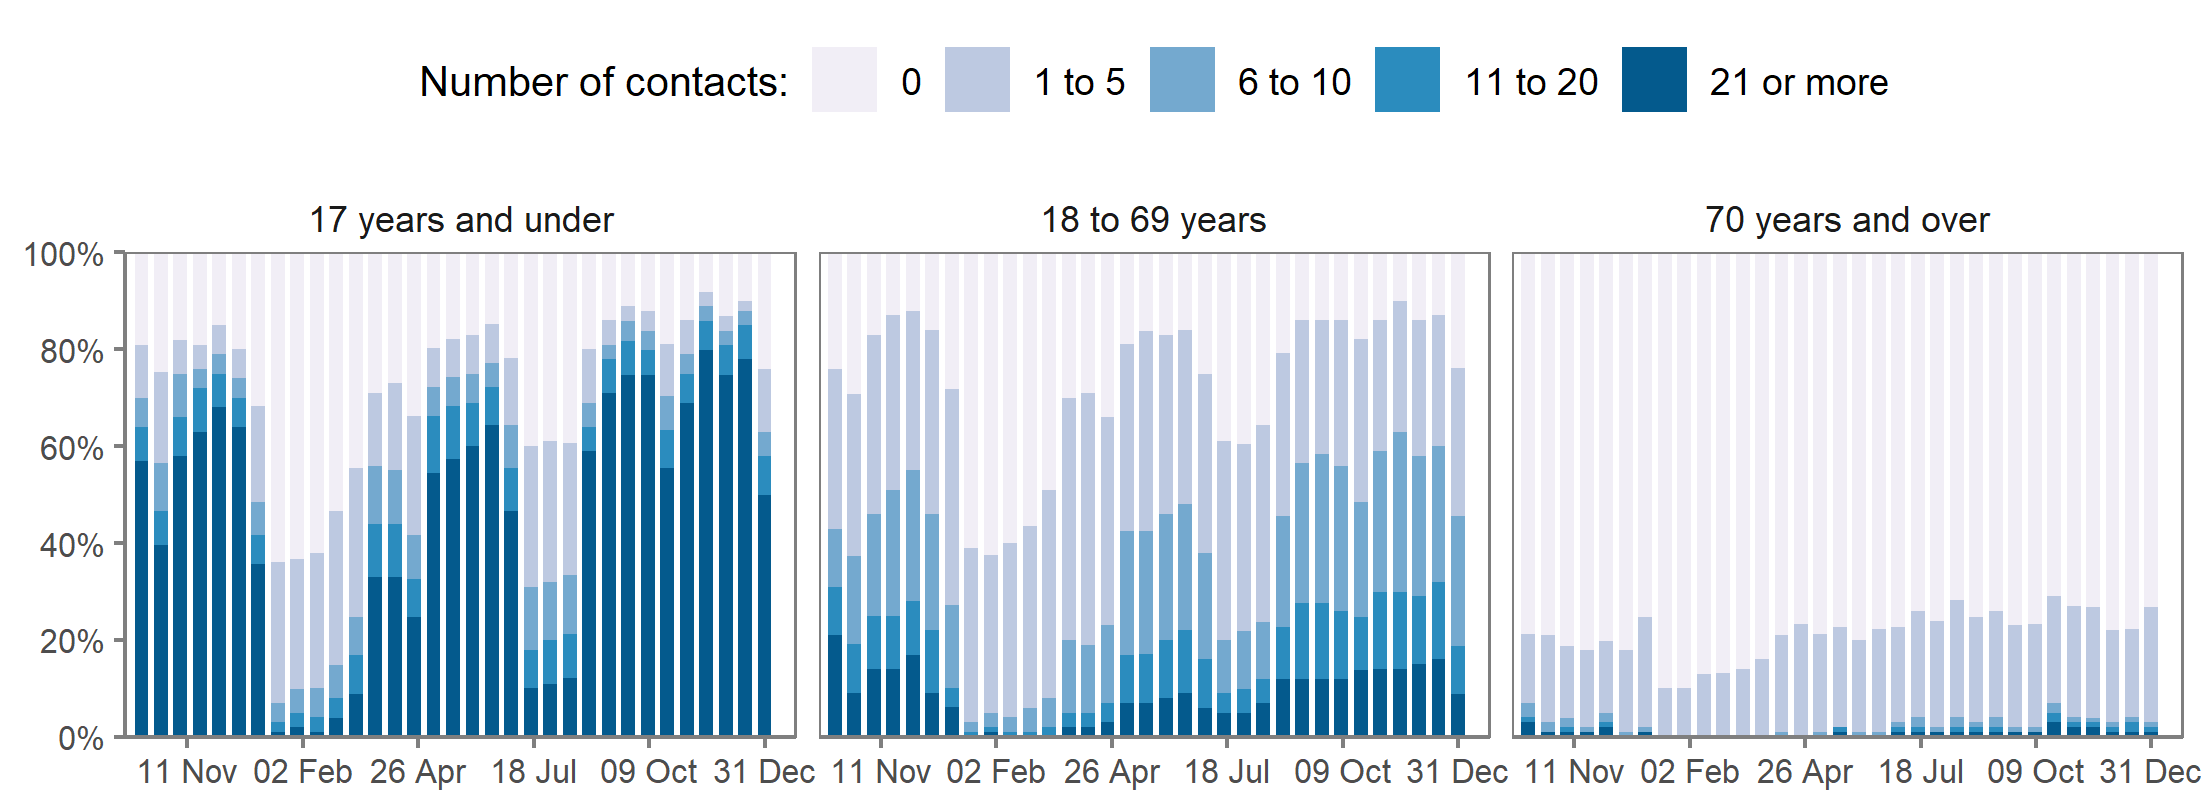 This chart shows the proportions of school-age children reporting each category of number of socially distanced contacts (0, 1 to 5, 6 to 10, 11 to 20, and 21 or more contacts).  Children appear to have consistently had more socially distanced contacts with those under 18 than with those aged 18-69 or over 70s.